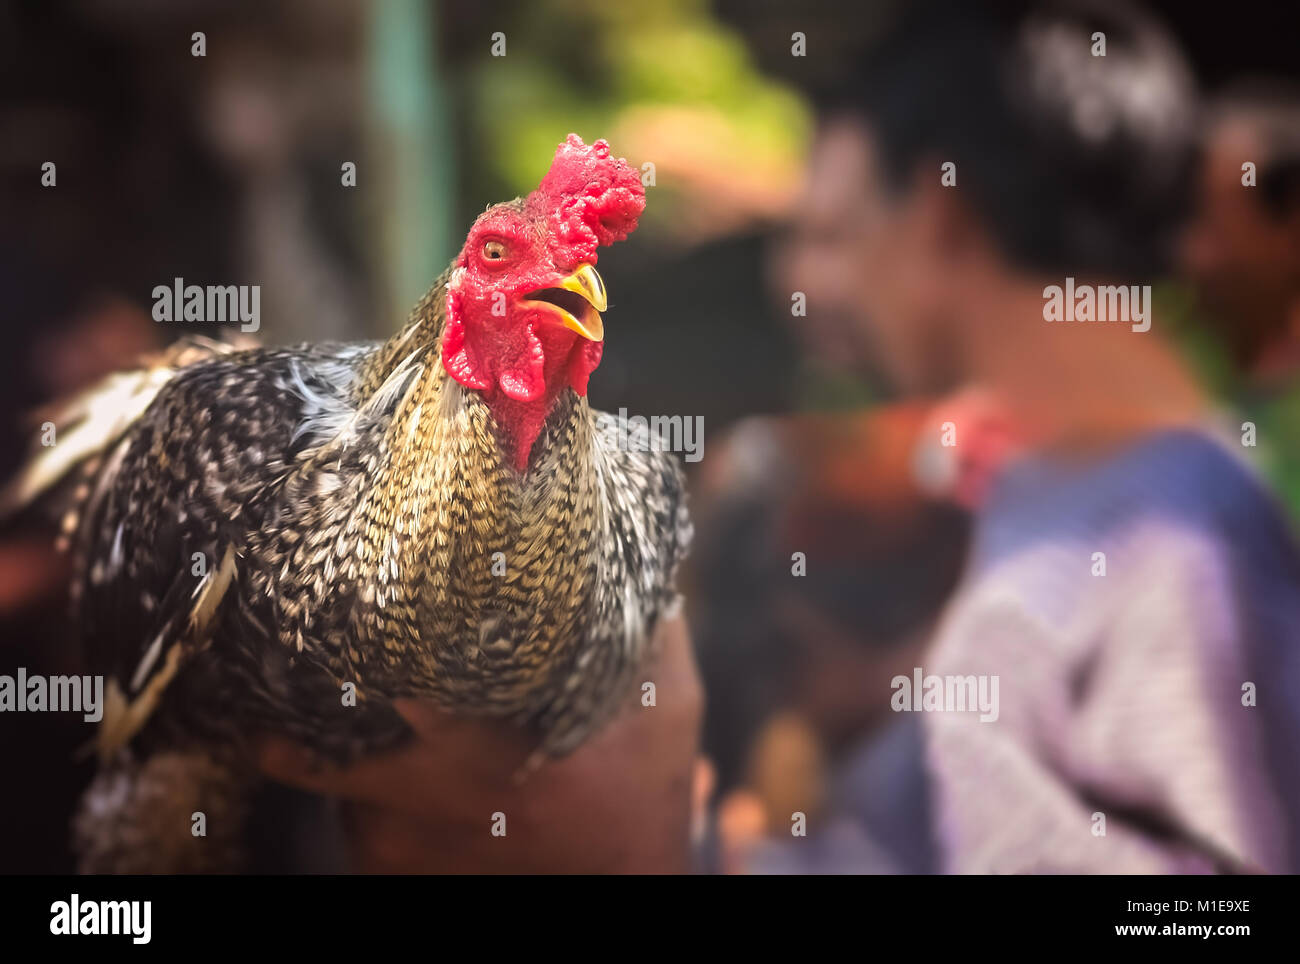 Rooster held in a hand by his owner ready for fighting in the illegal cockfights that take place on the Indonesian island of Bali, Asia Stock Photo